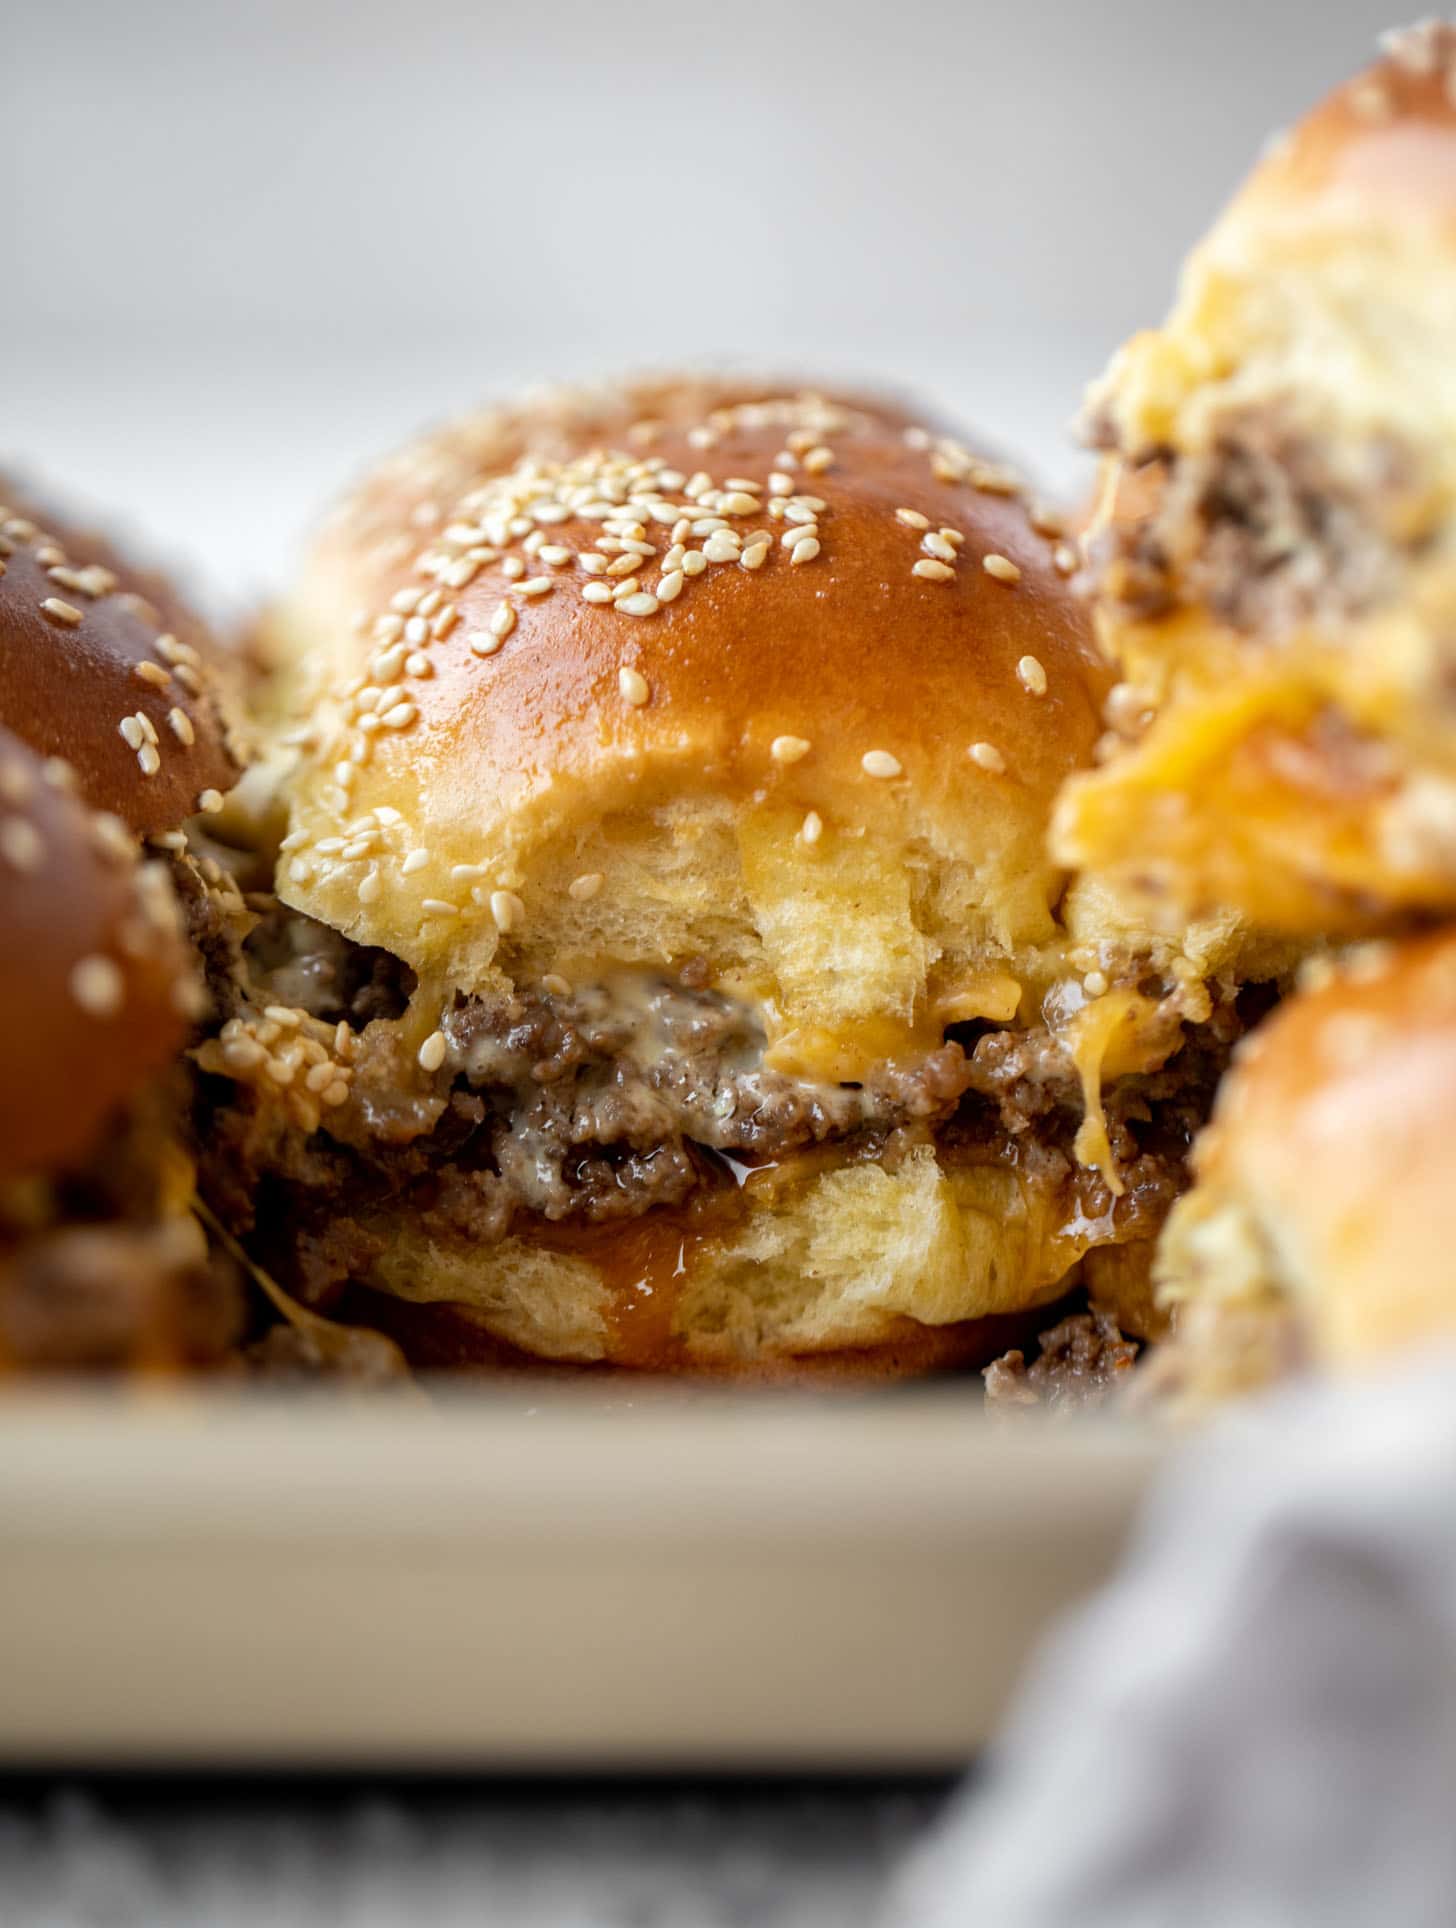 cheeseburger sliders with house sauce